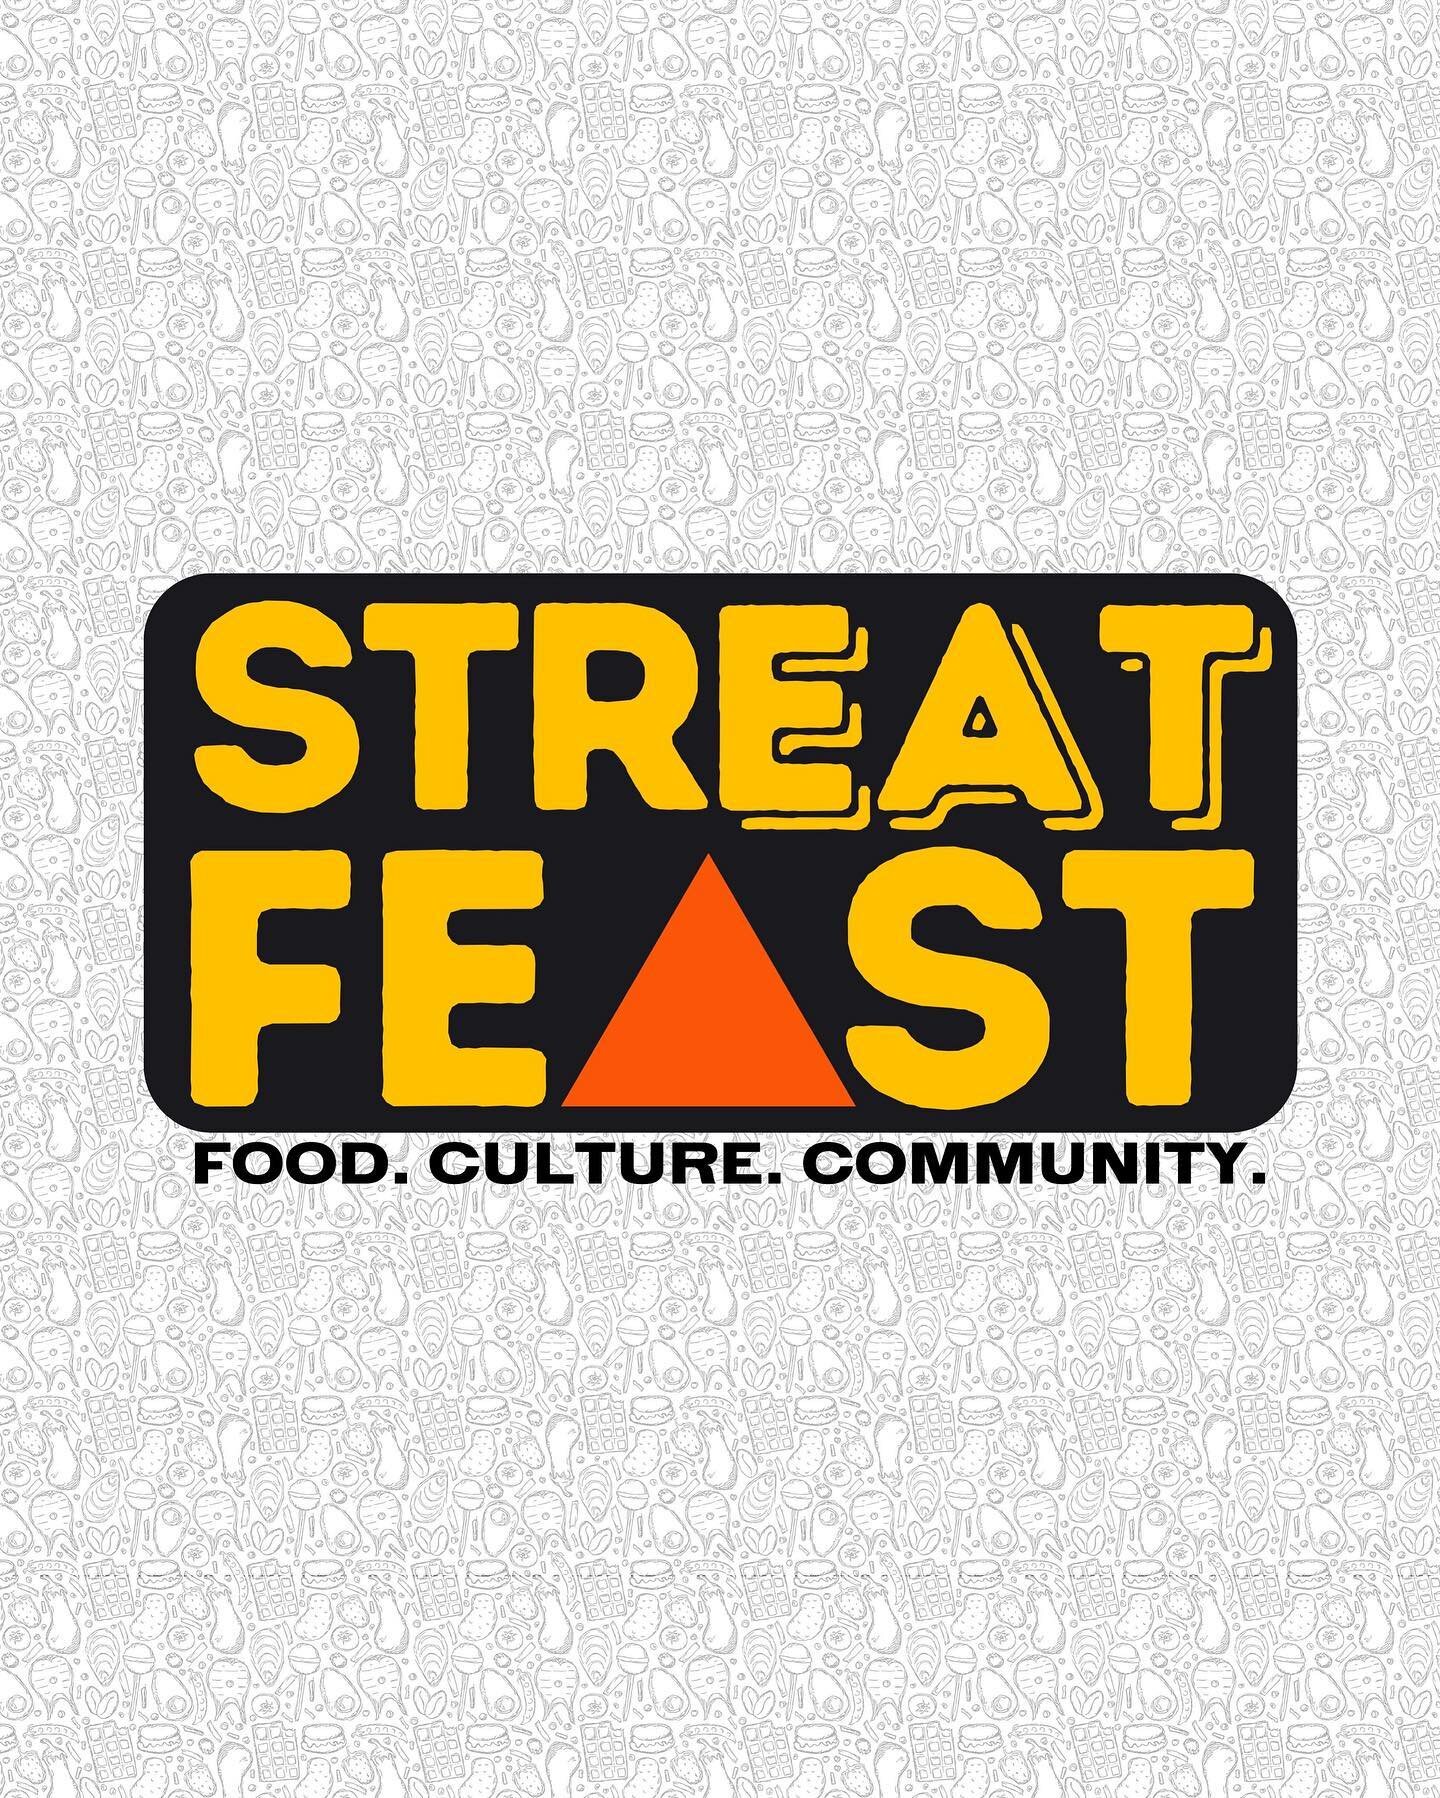 🌎 WINNIPEG! Stay tuned for a delicious and fun summer coming up!
⭐️ StrEAT FEAST FESTIVAL 
FOOD ⚡️ CULTURE ⚡️ COMMUNITY
___
Business and Partnership inquiries: streatfeastcanada@gmail.com
Powered by @aroundtheworldinwinnipeg by @alarkco 
___
#streat